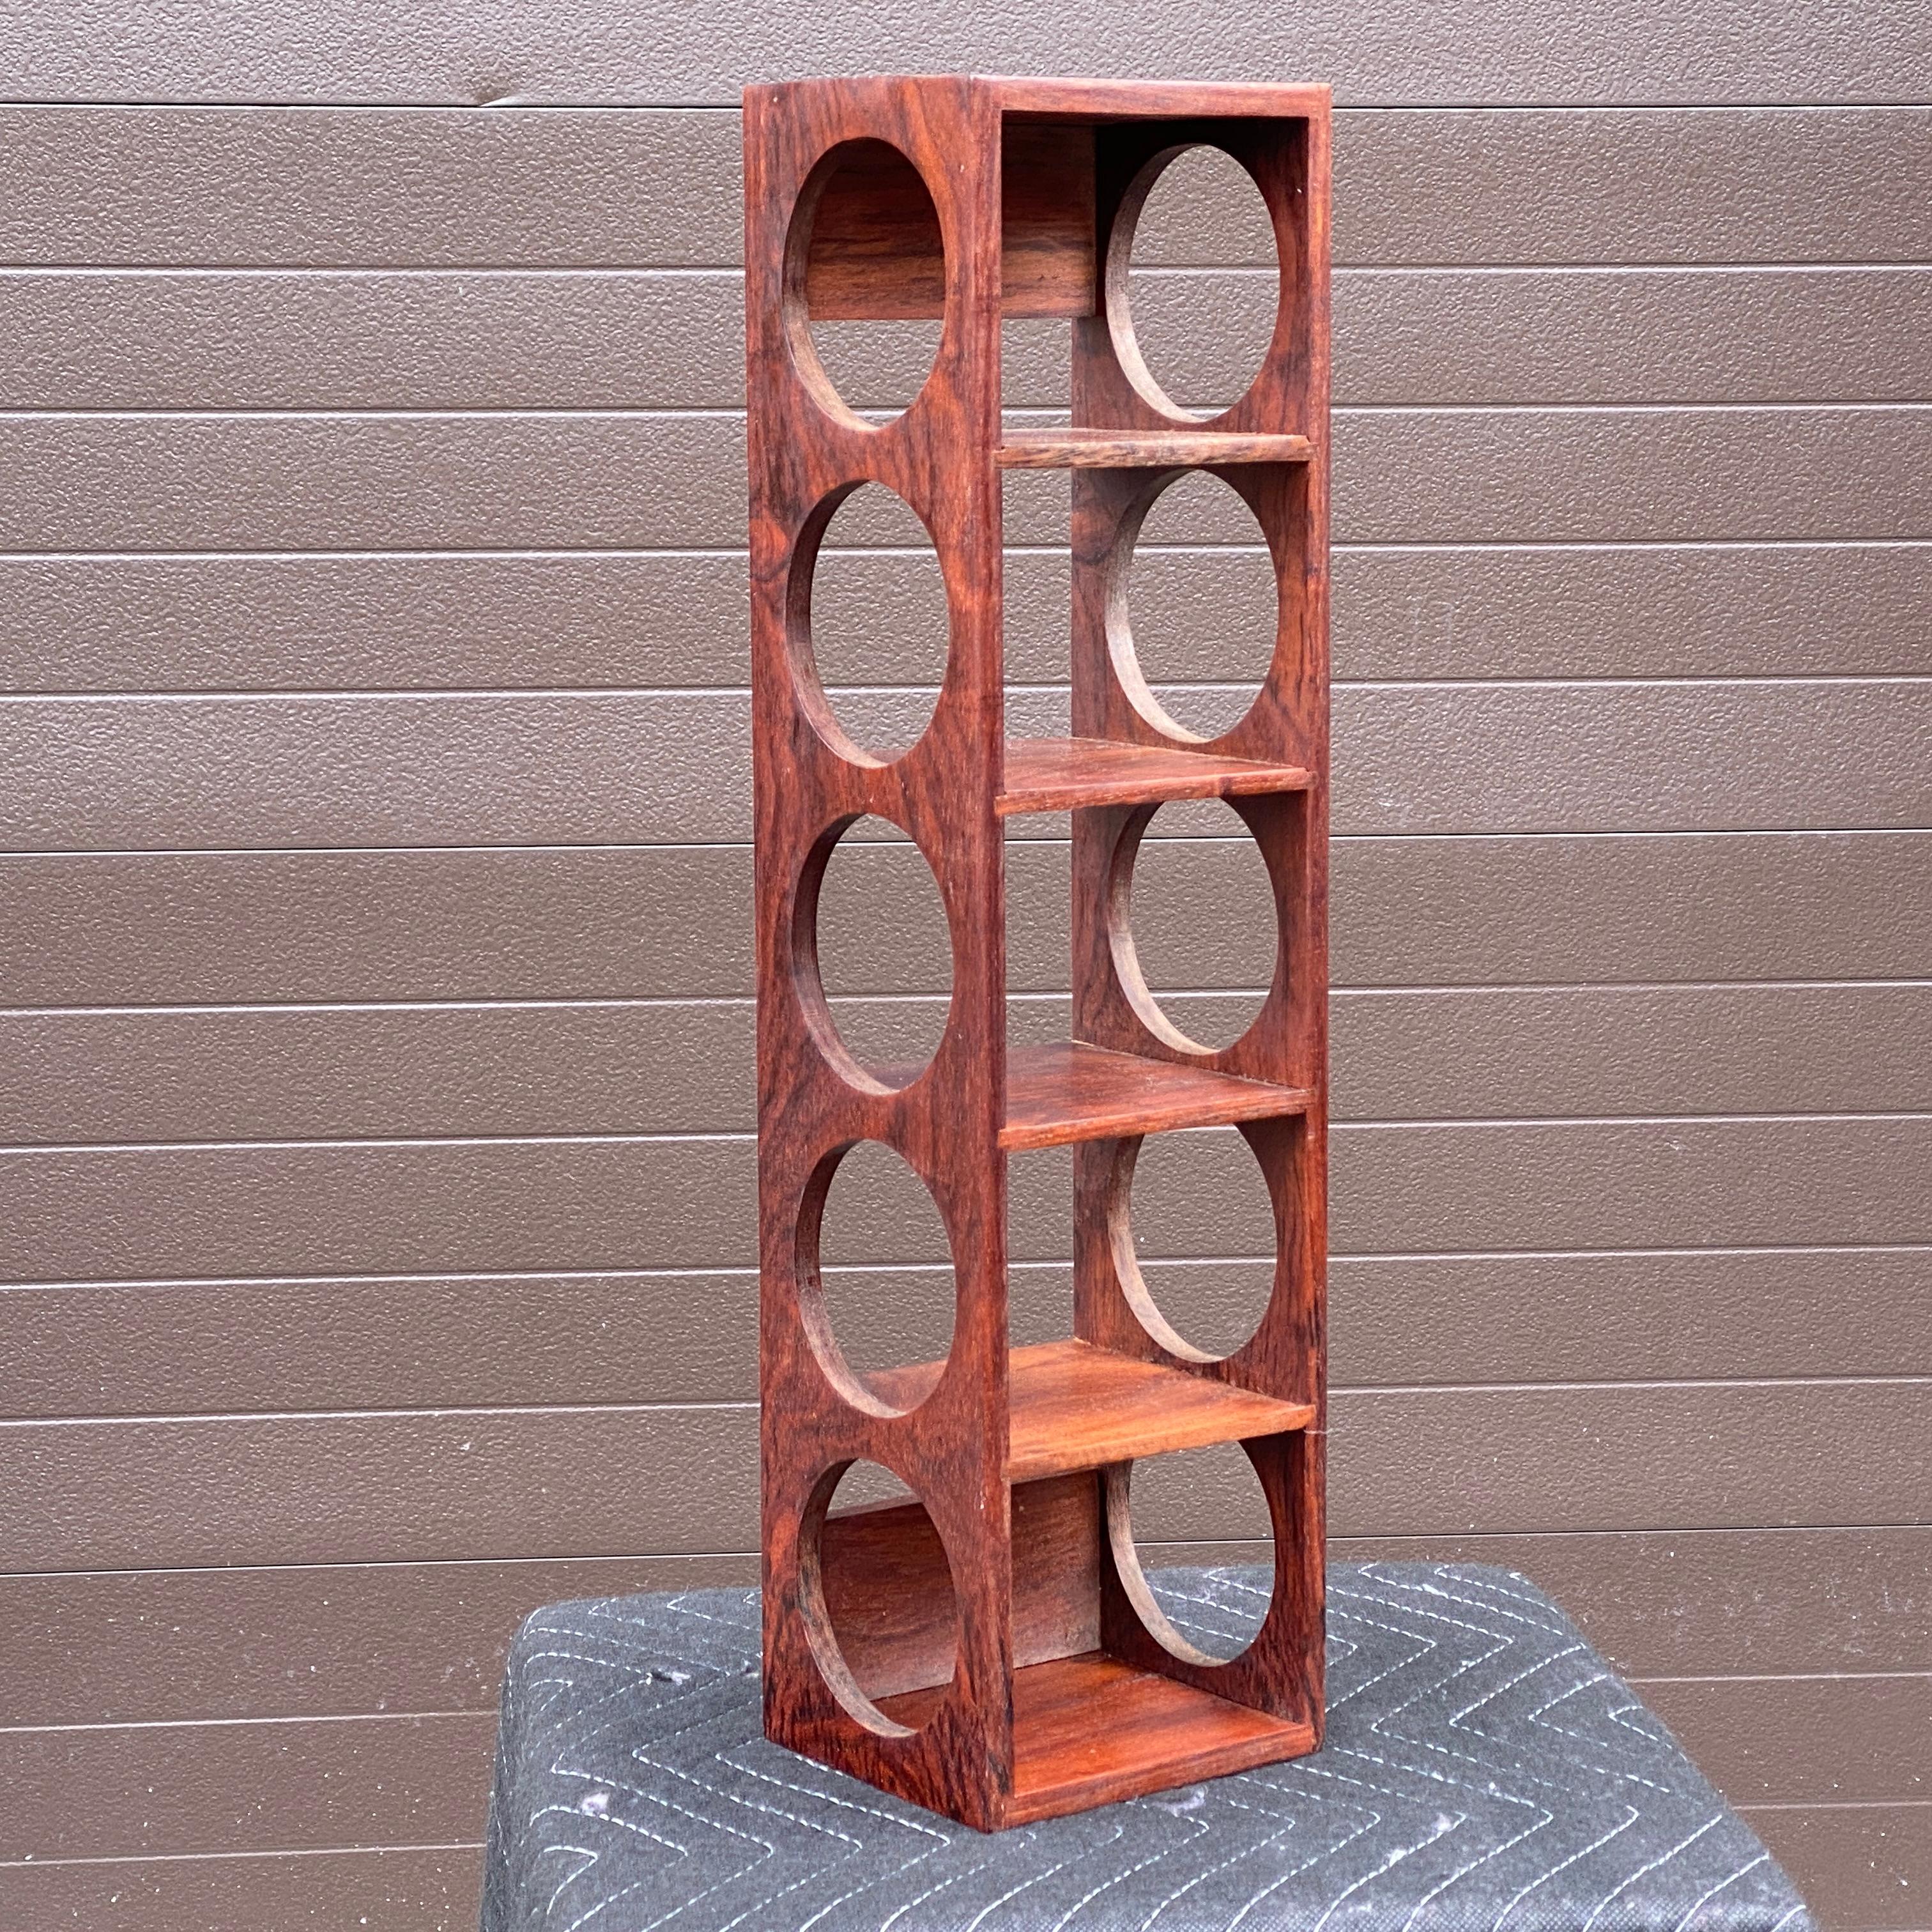 Vintage Danish Modern Five Bottle Solid Rosewood Wall-Mounted Wine Rack
Unmarked but has been attributed to Dansk.